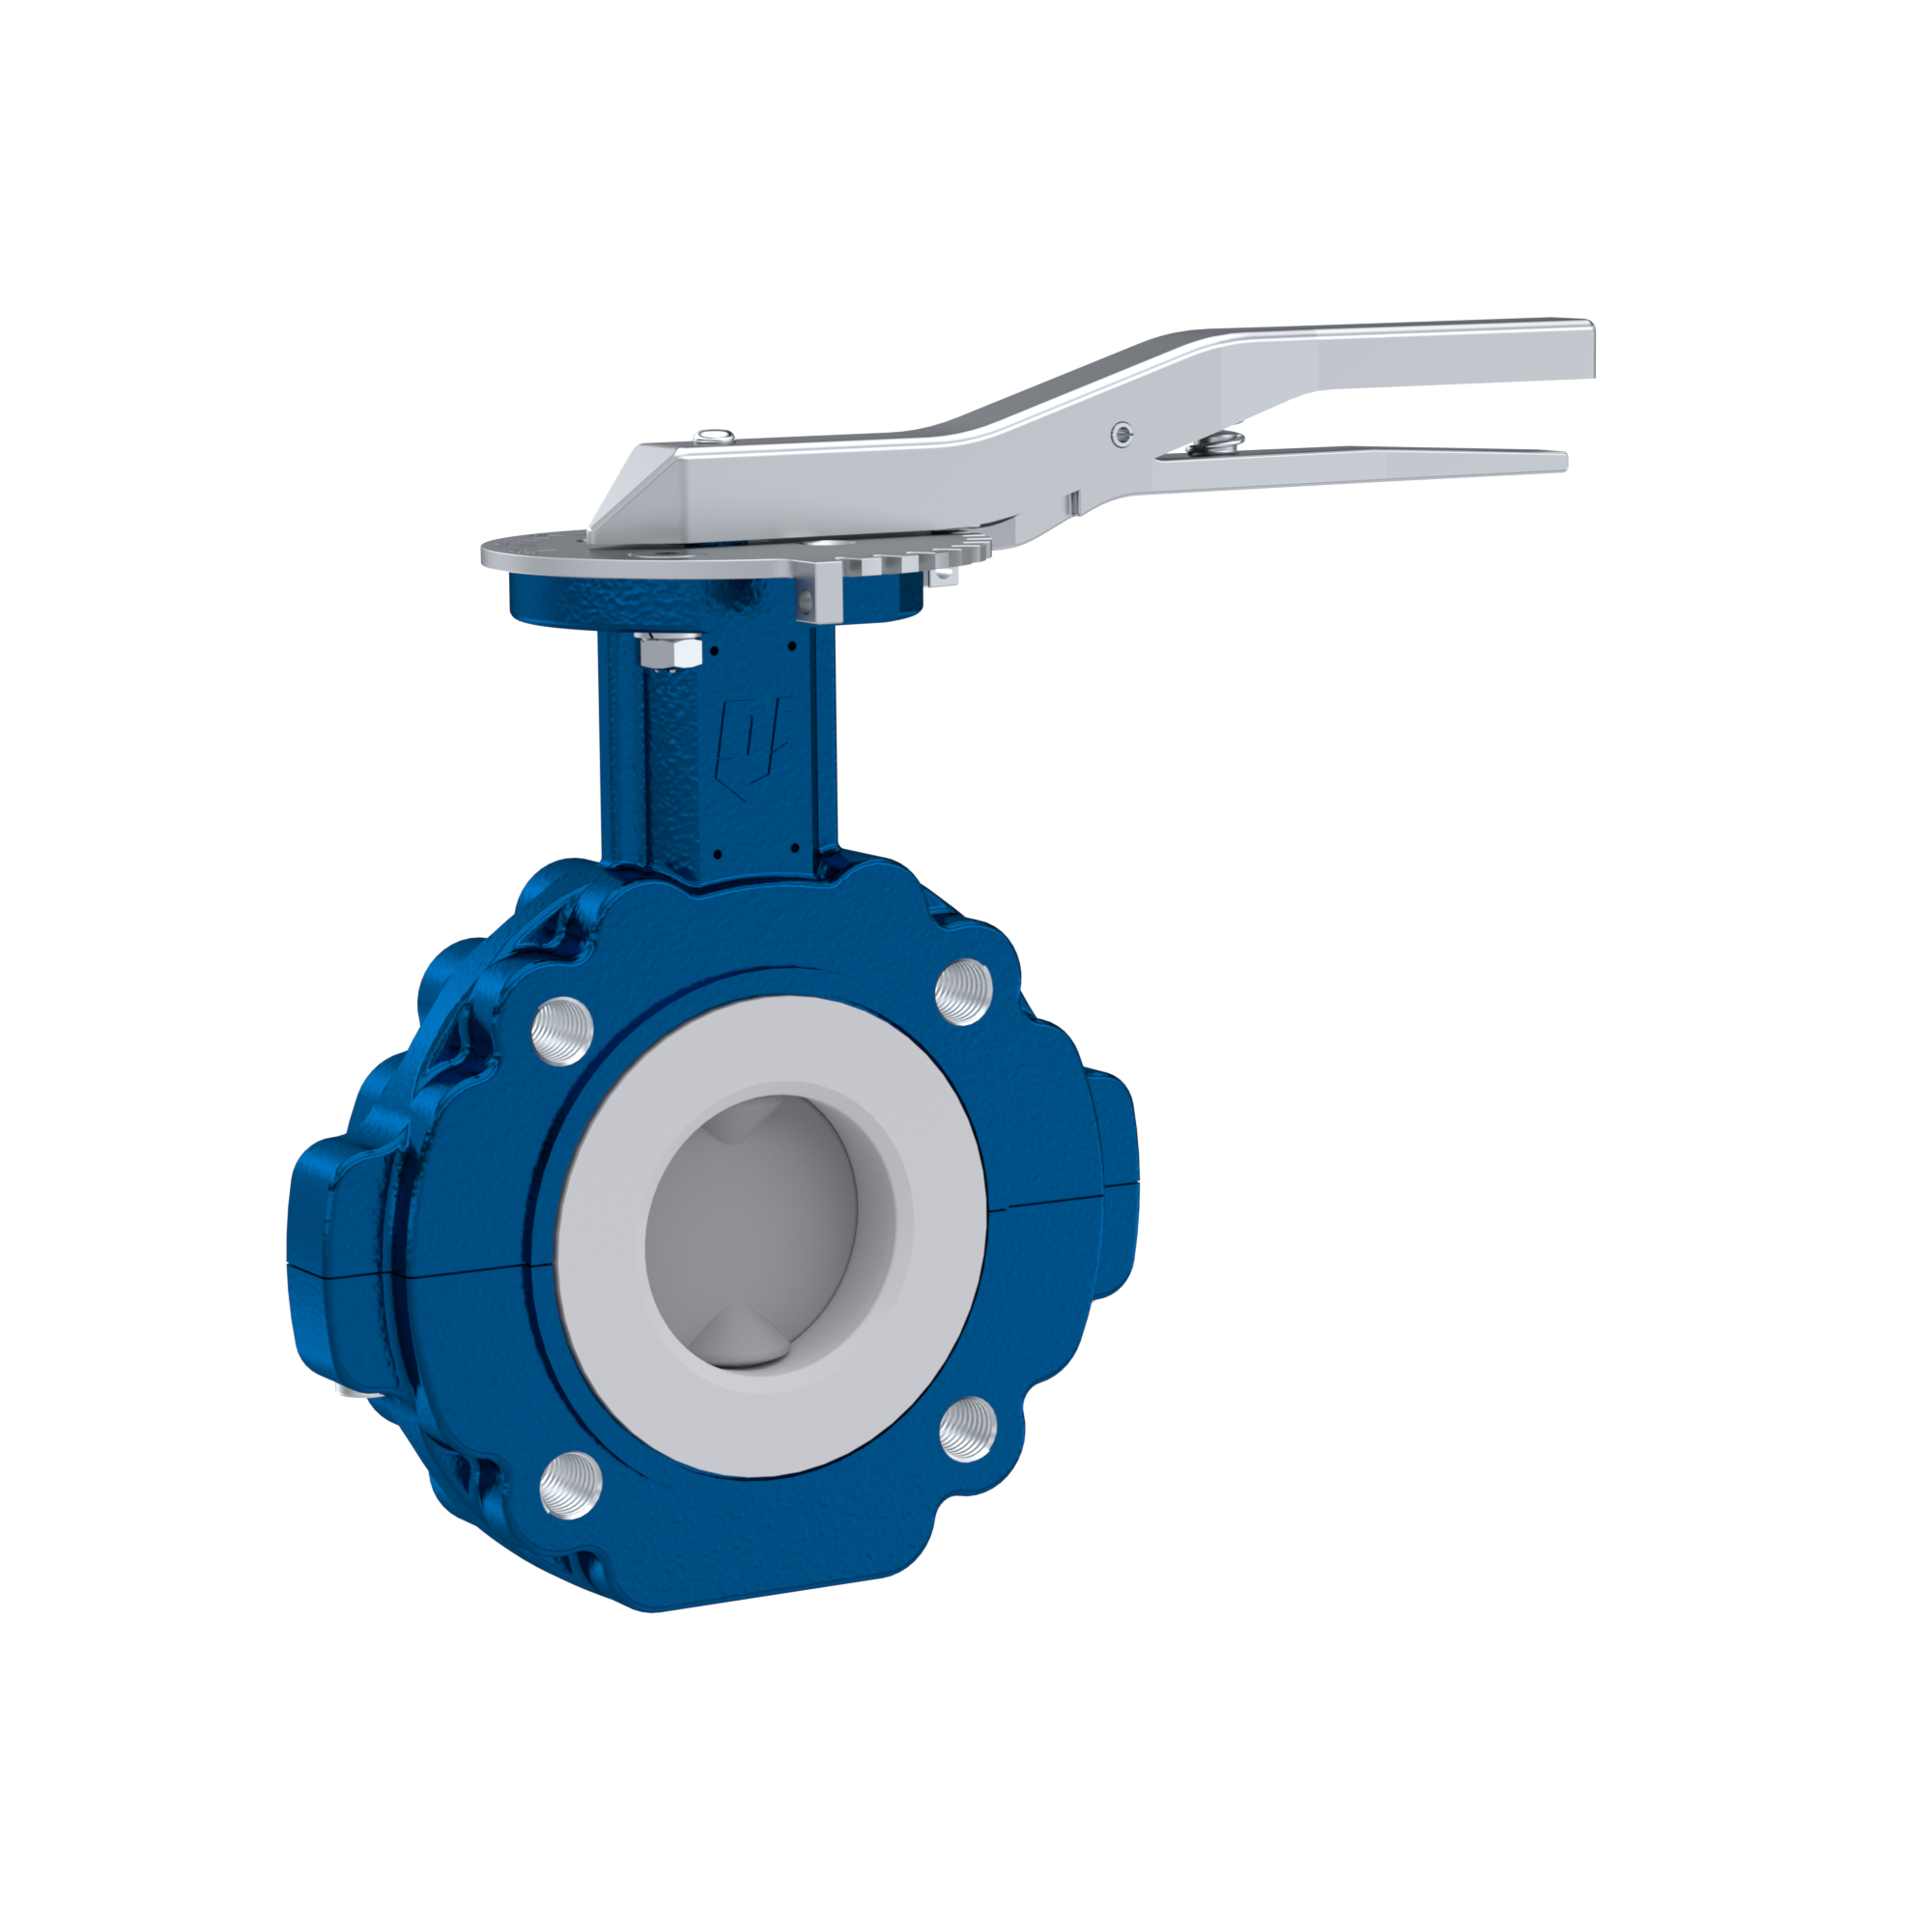 PFA-Butterfly-valve PTFE AK10 DN80 ANSI150 lever silicone insert